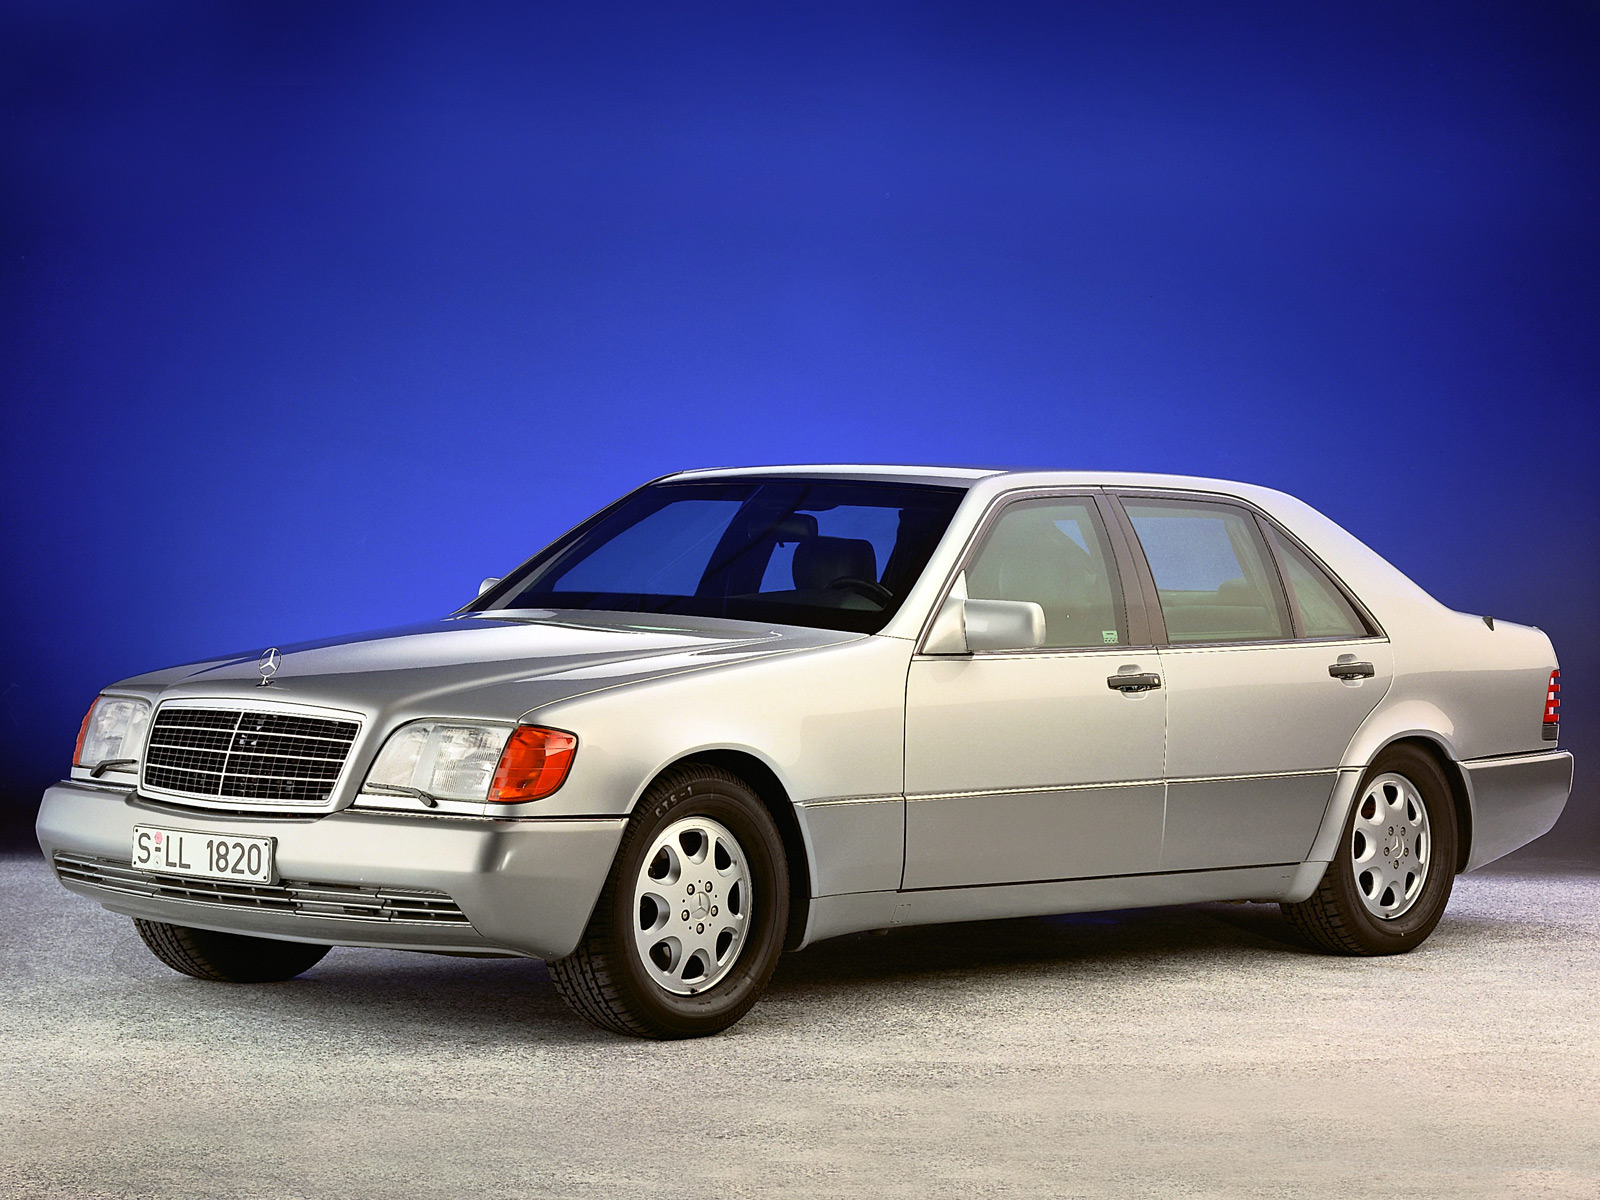 Armored Mercedes Benz S Guard W140 Luxury Wallpaper Background